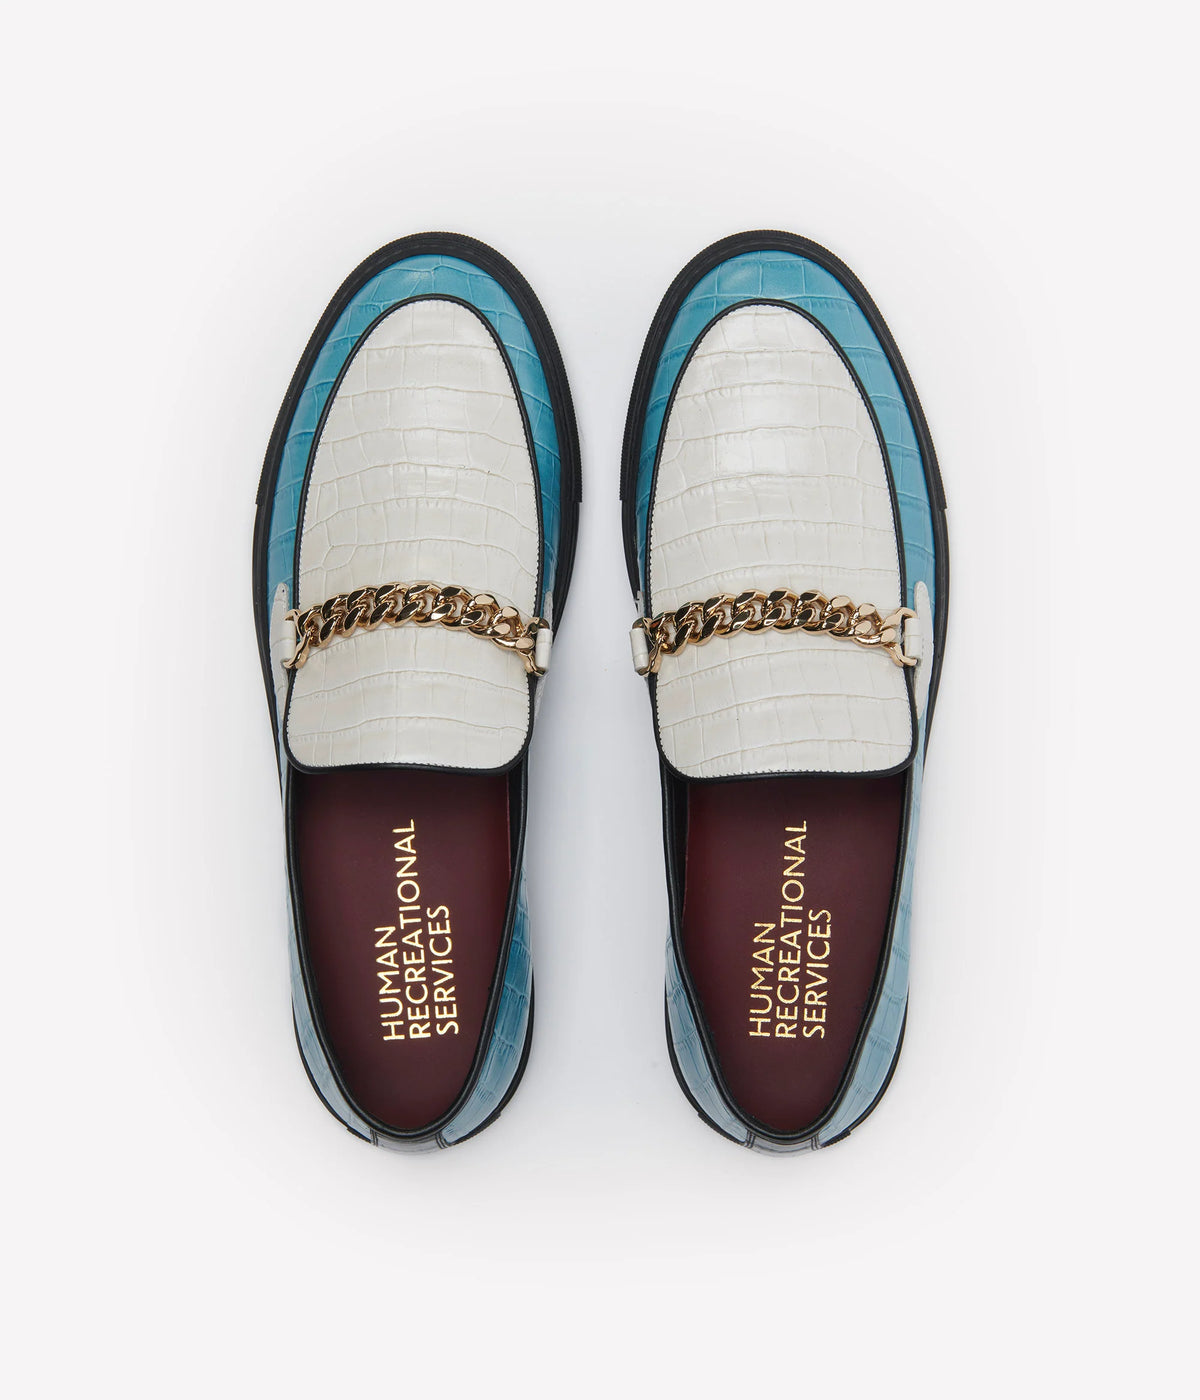 Humean recreational services el dorado loafer made with light blue and white croc leather and gold cuban link chain with black sole. 